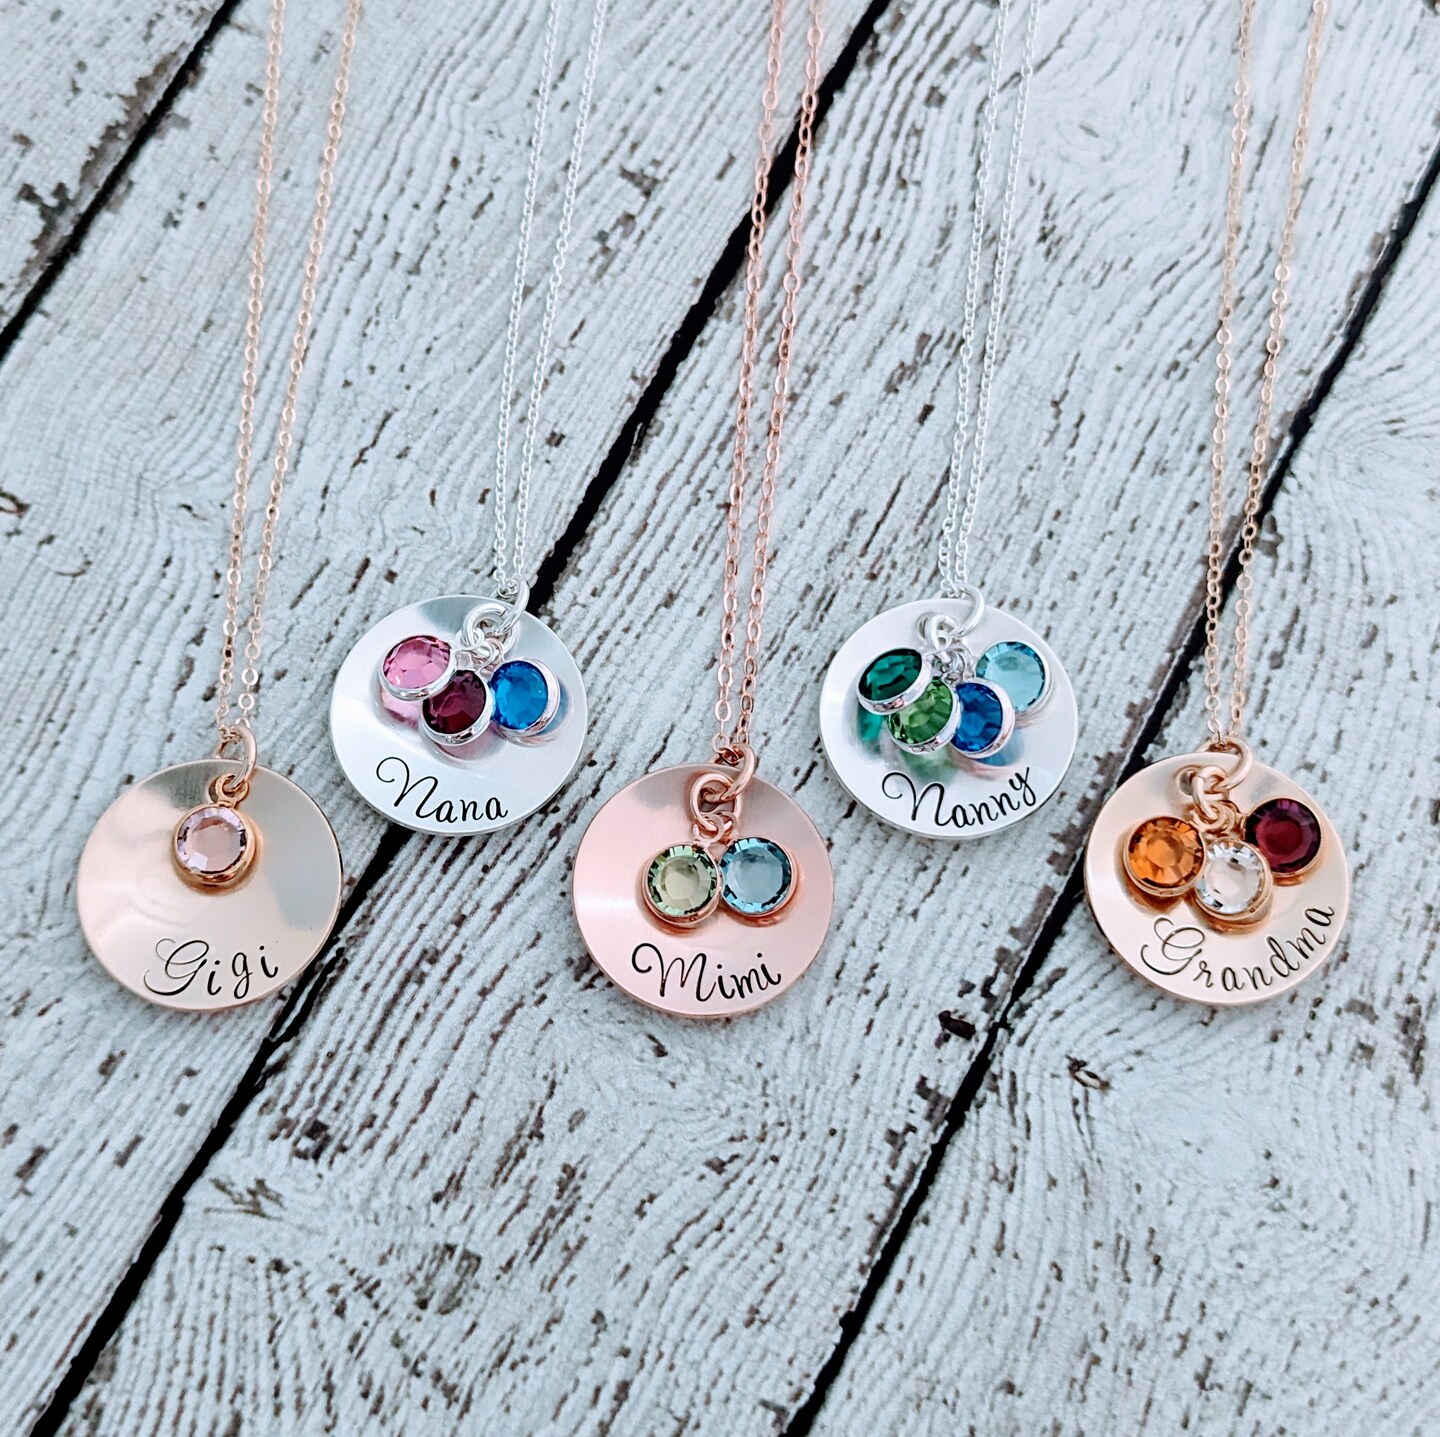 Mimi Necklace, Mimi Heart Necklace, Mimi Gifts, Nana Necklace, Heart  Floating Locket, Birthstone Necklace, Gifts for Grandmothers, Grandma -  Etsy | Mimi gift, Family tree necklace, Personalized hand stamped jewelry